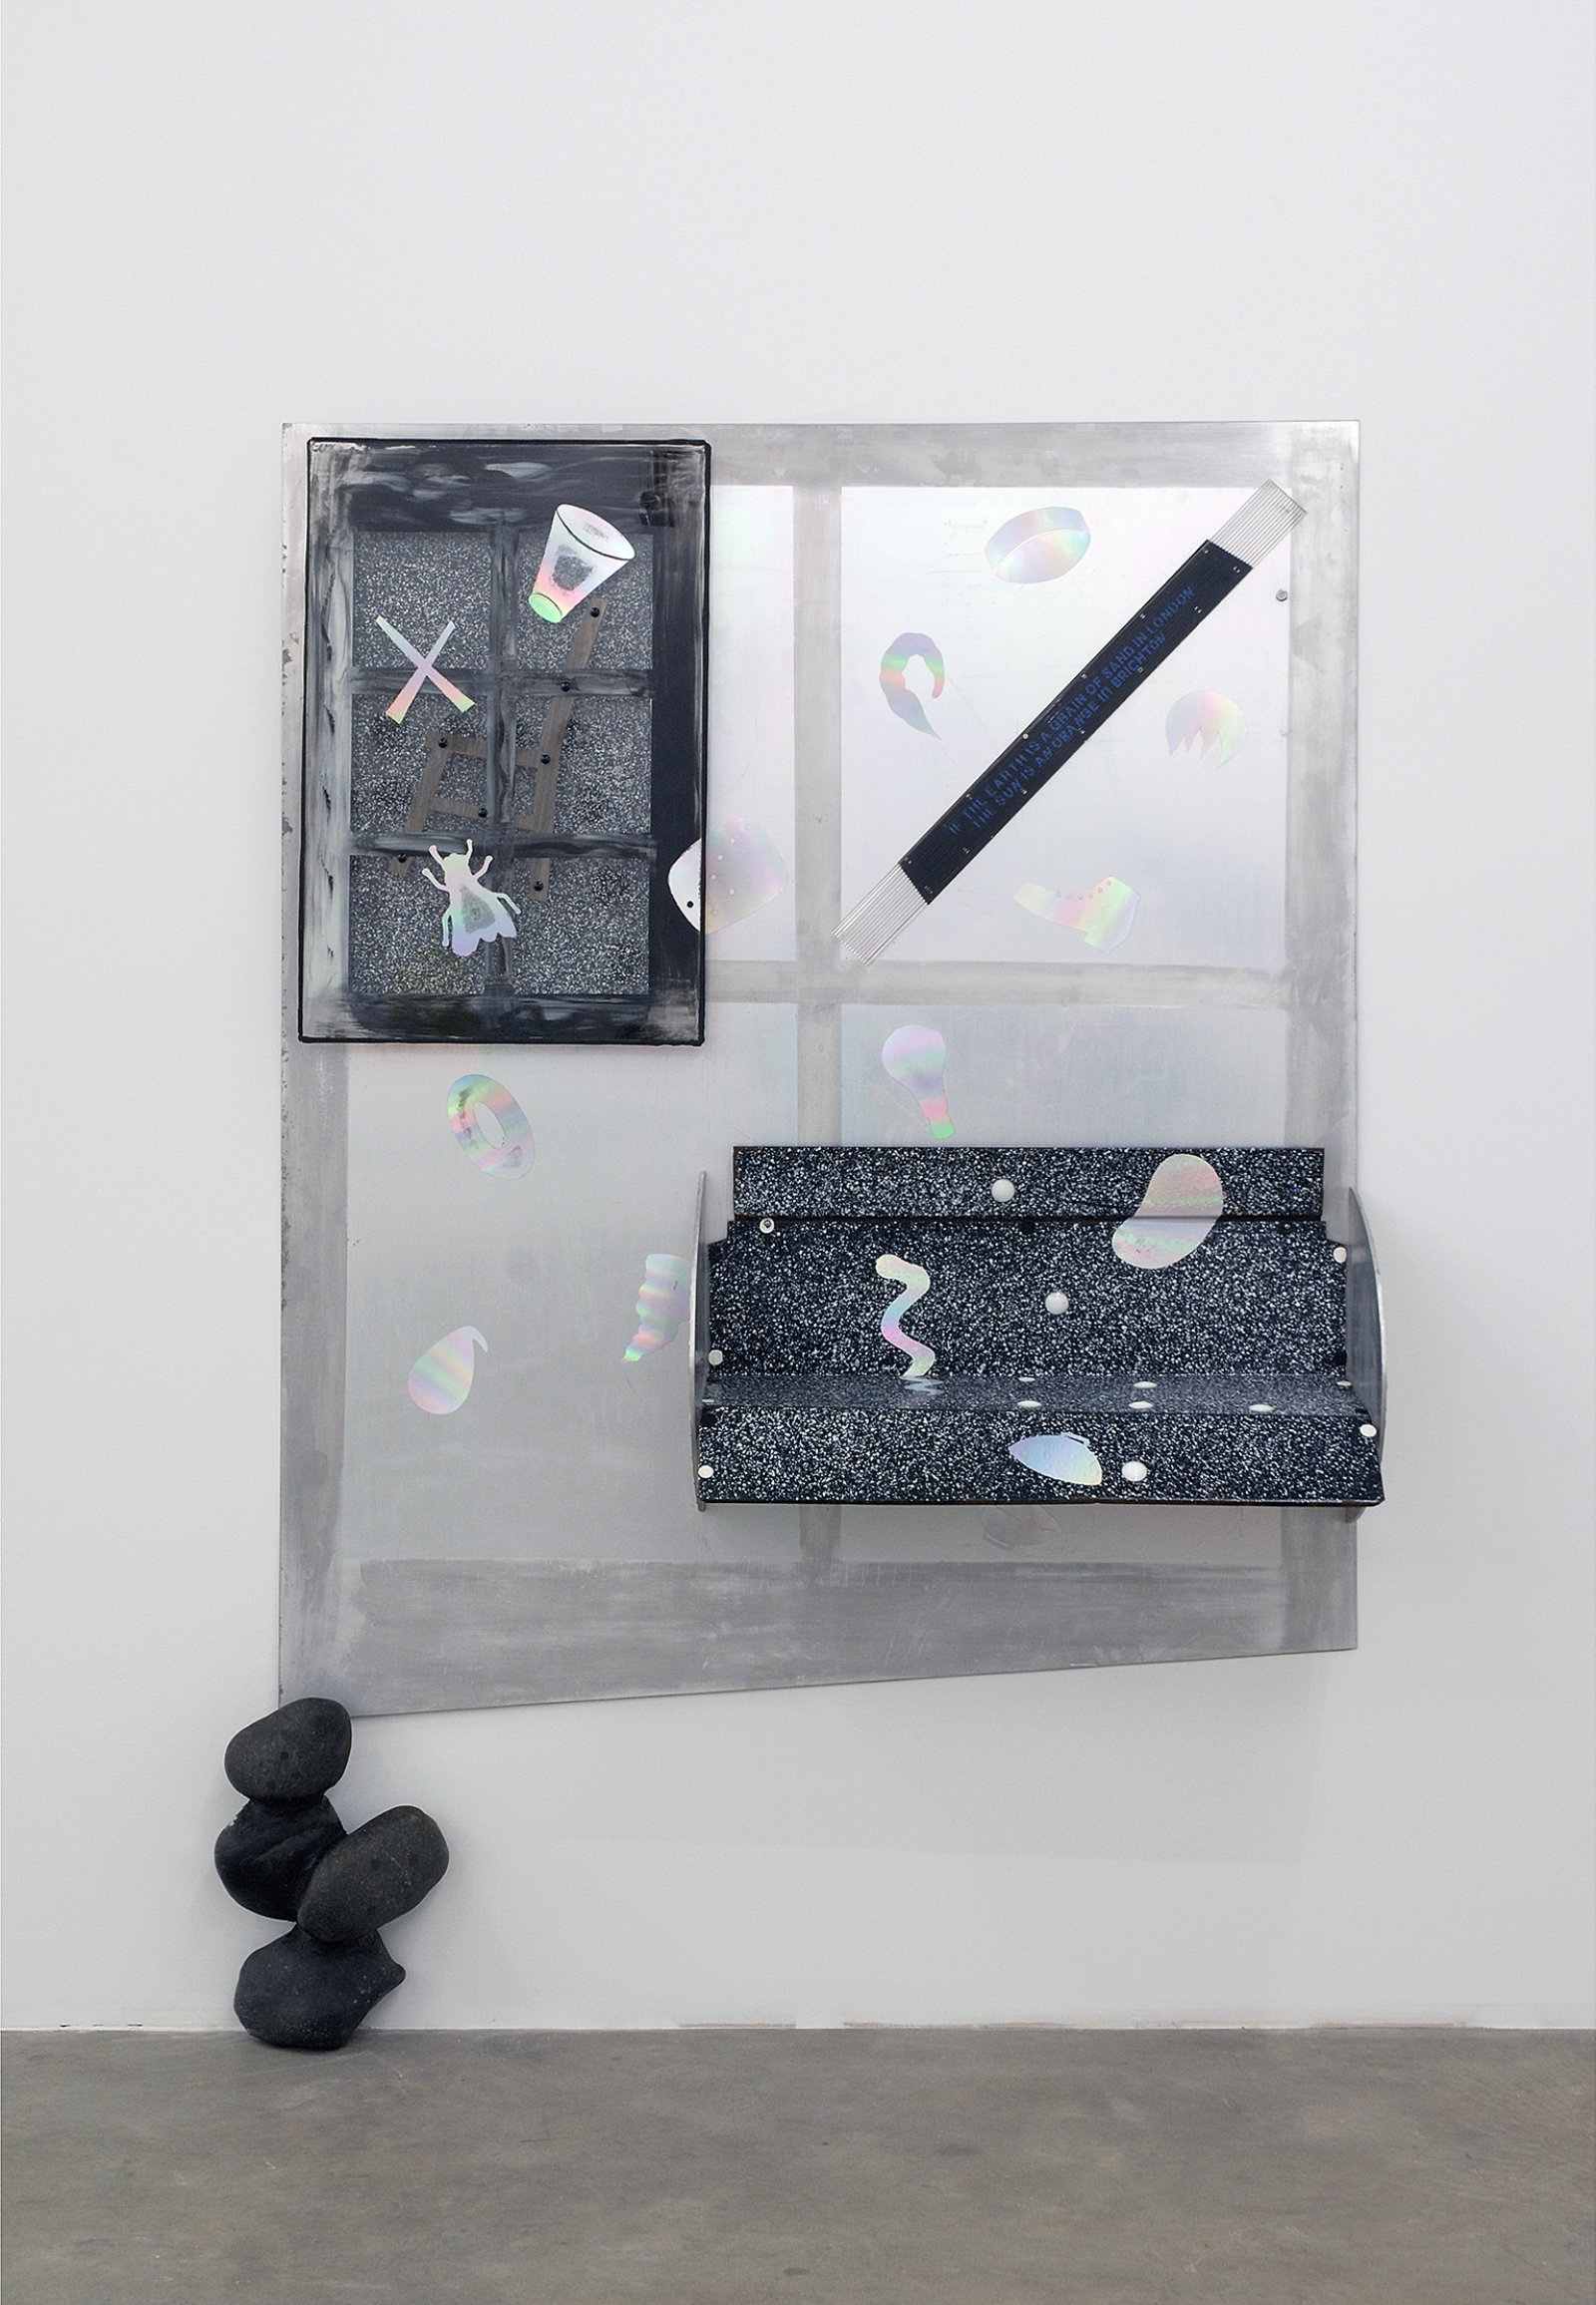 Jerry Pethick, Outskirts, 1987–1988, aluminum, stones, enamelled steel, silicone, spectrafoil, wood, prismatic bakelite, glass, 85 x 56 x 15 in. (215 x 142 x 37 cm)  